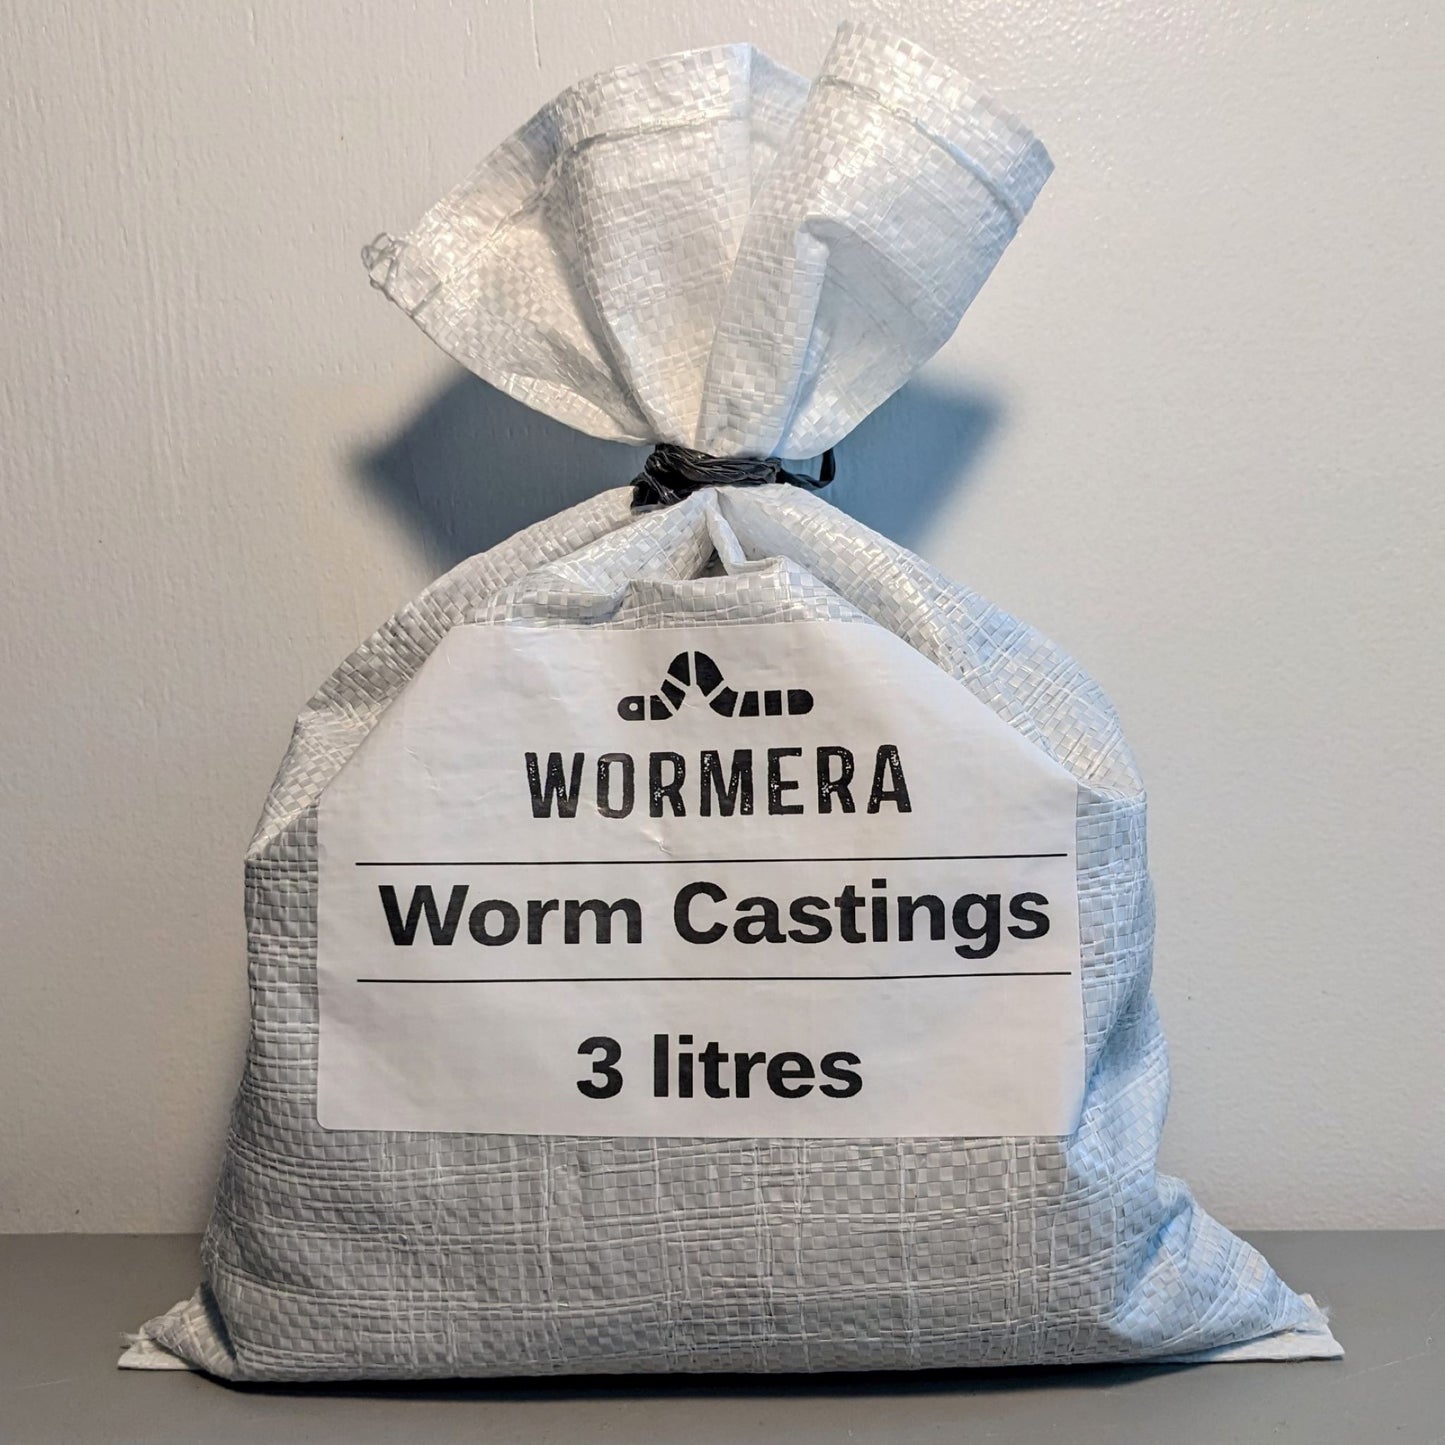 Red wiggler worm castings 3 litre size.